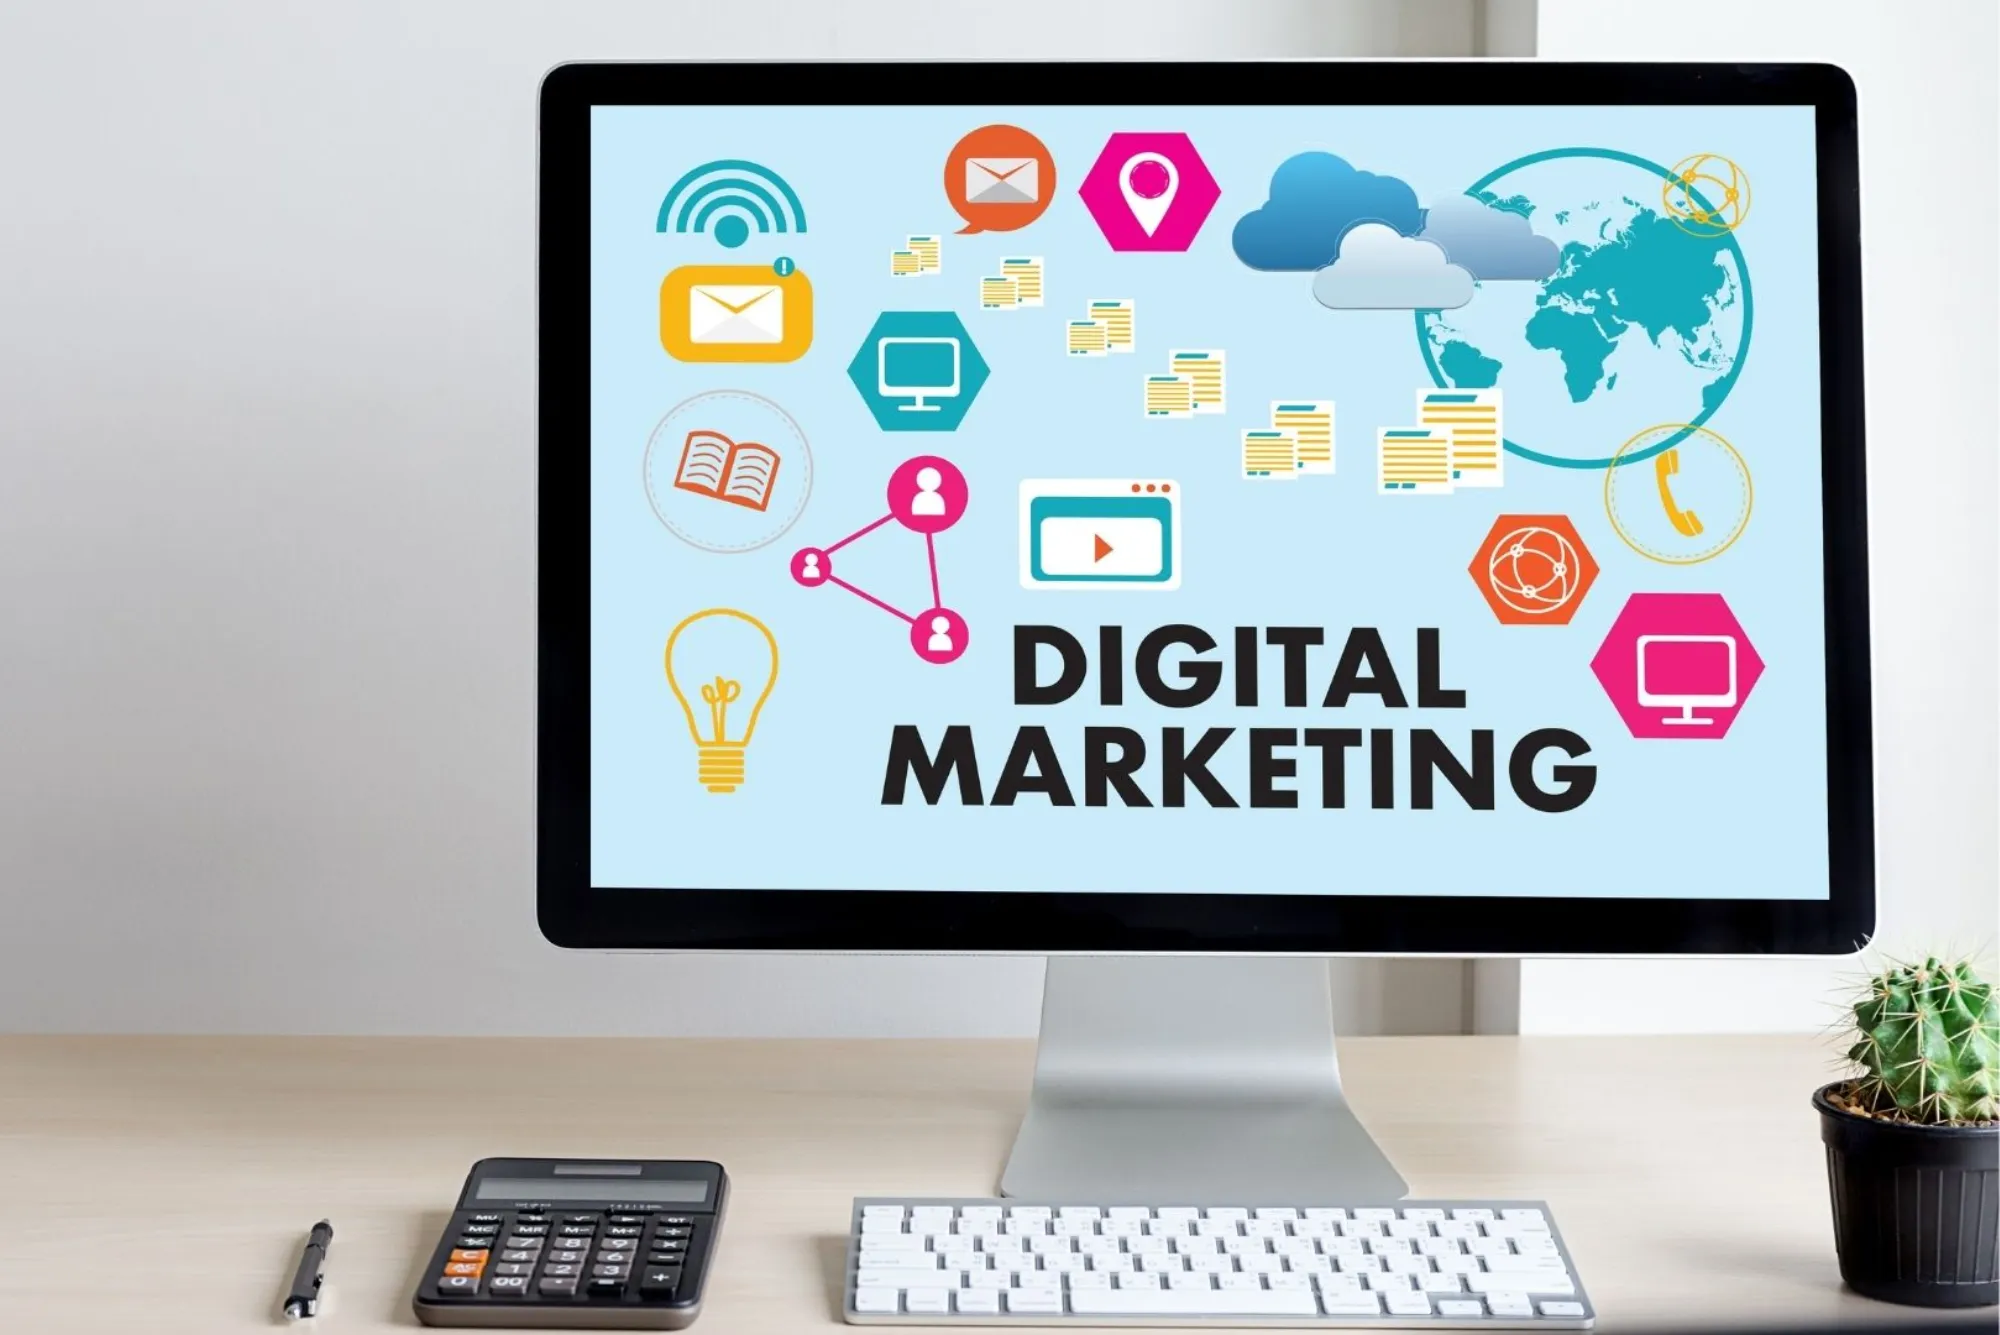 What Do You Learn in Digital Marketing Course